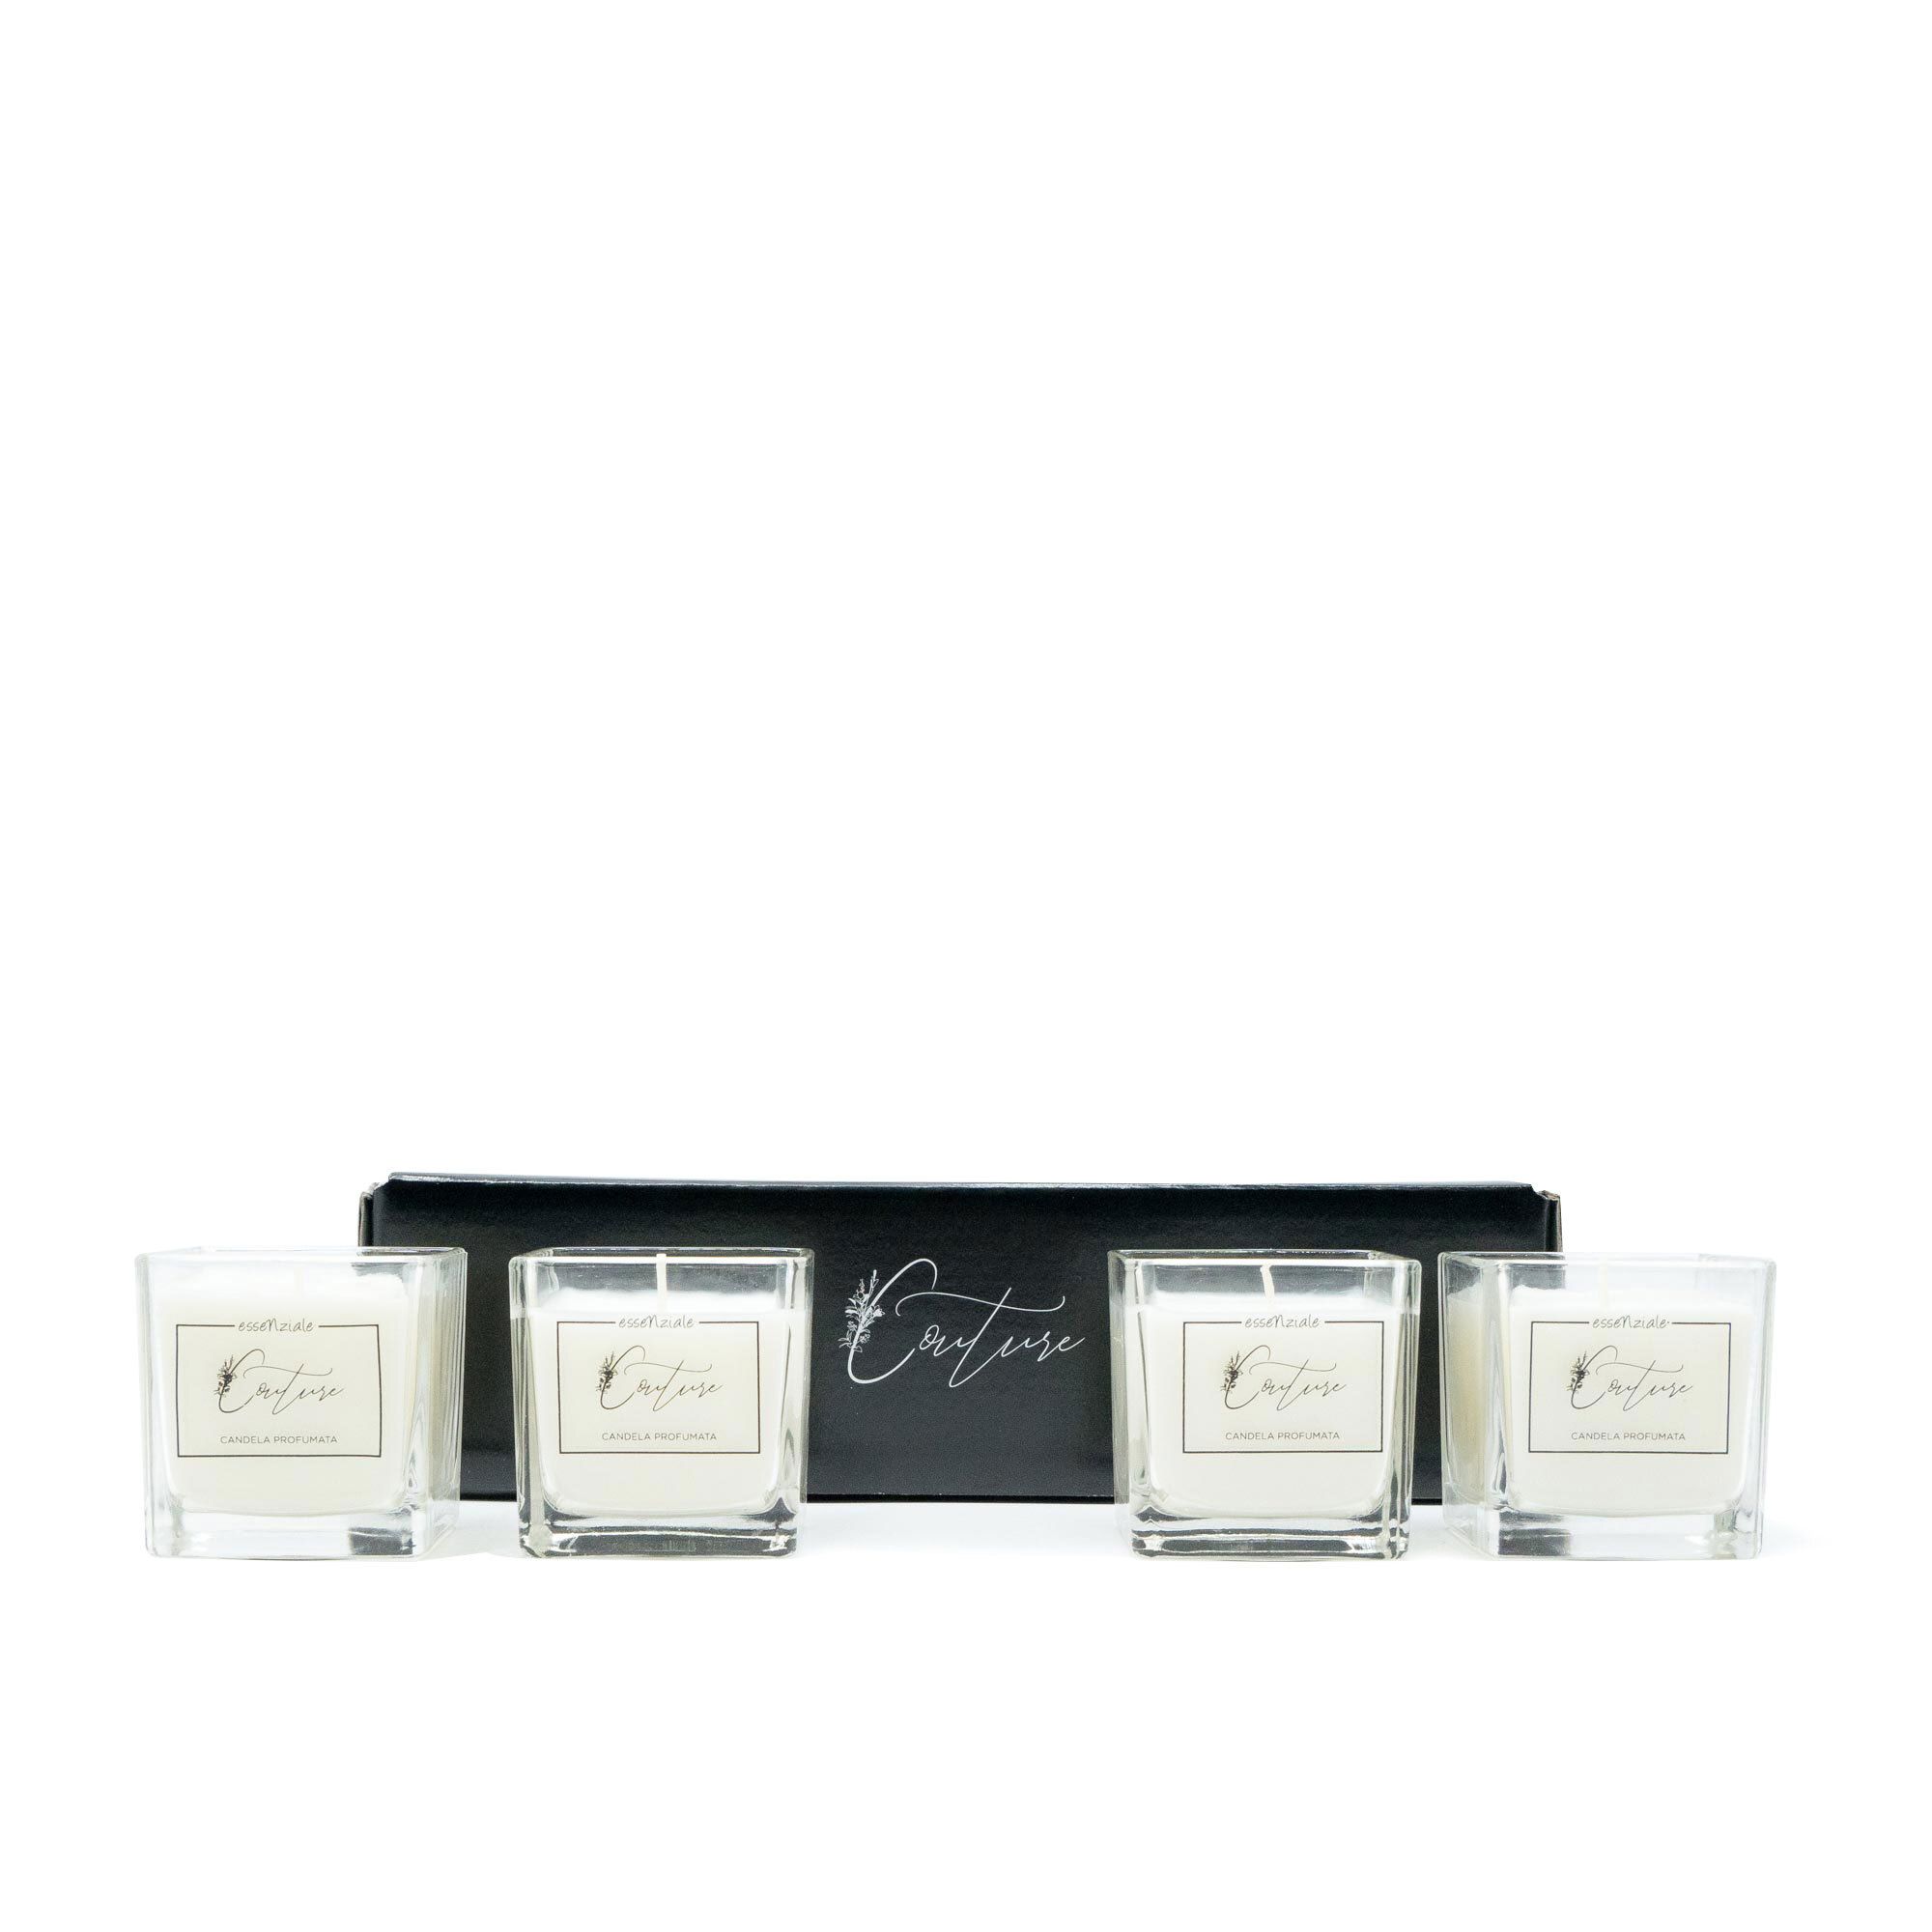 Image of 4 candele assortite Couture